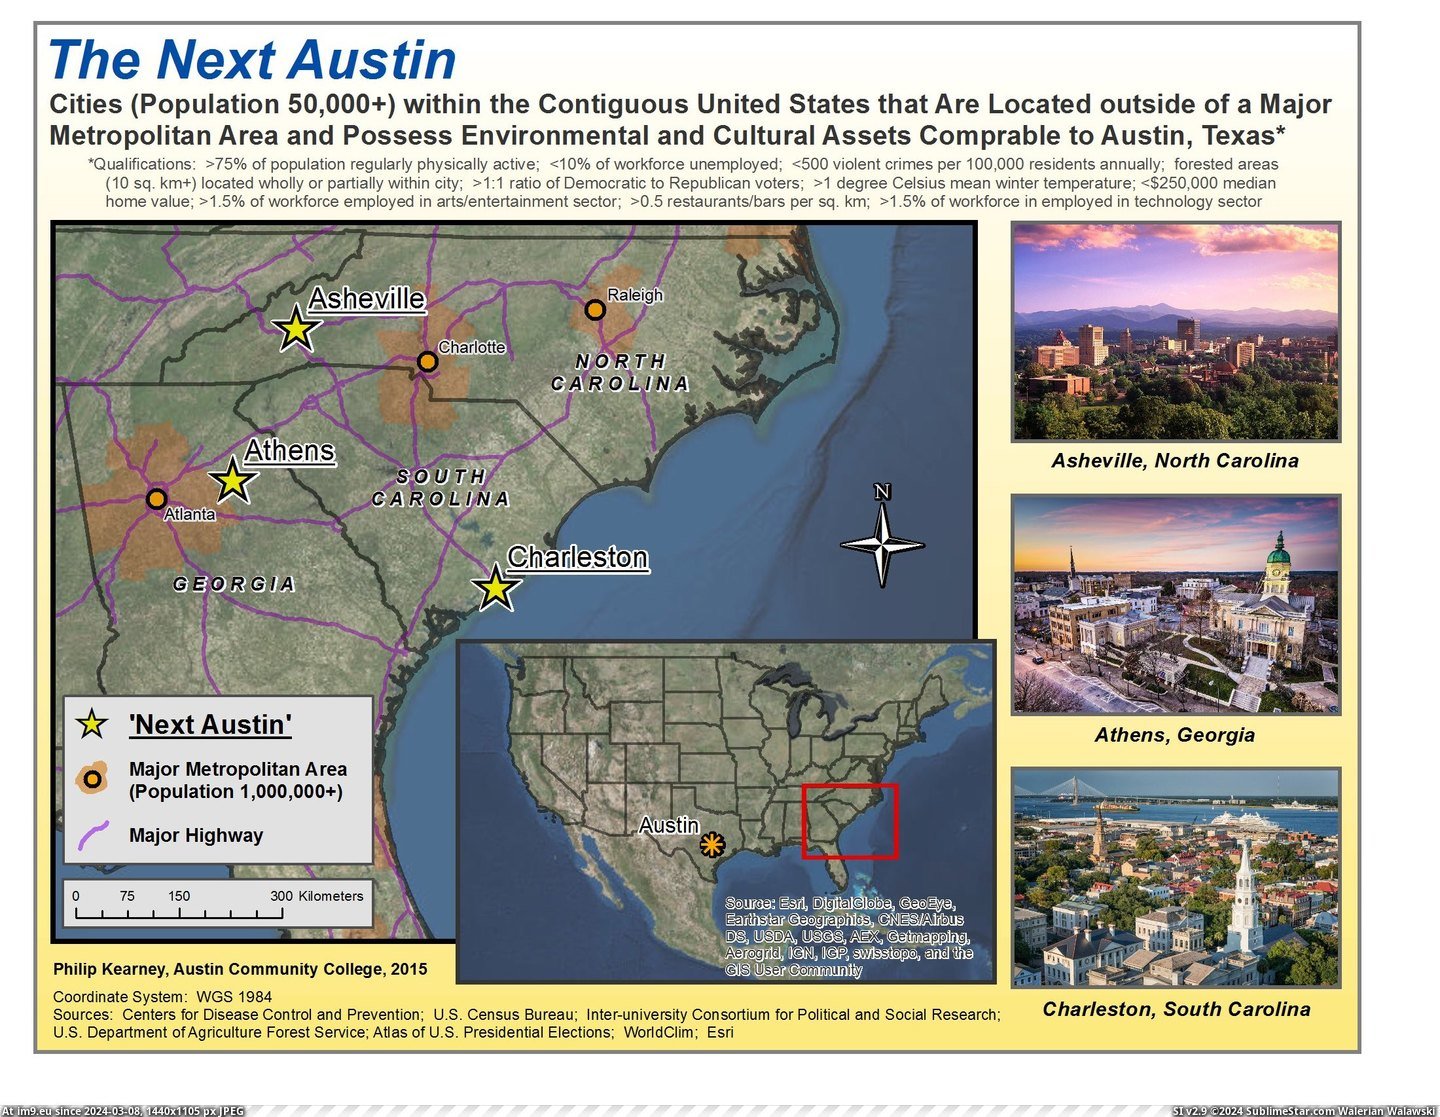 #Share #Thought #Project #Austin #Geography #Class #Final [Mapporn] Thought I'd share my final project for my geography (GIS) class with y'all: 'The Next Austin'  [2200x1700] Pic. (Bild von album My r/MAPS favs))